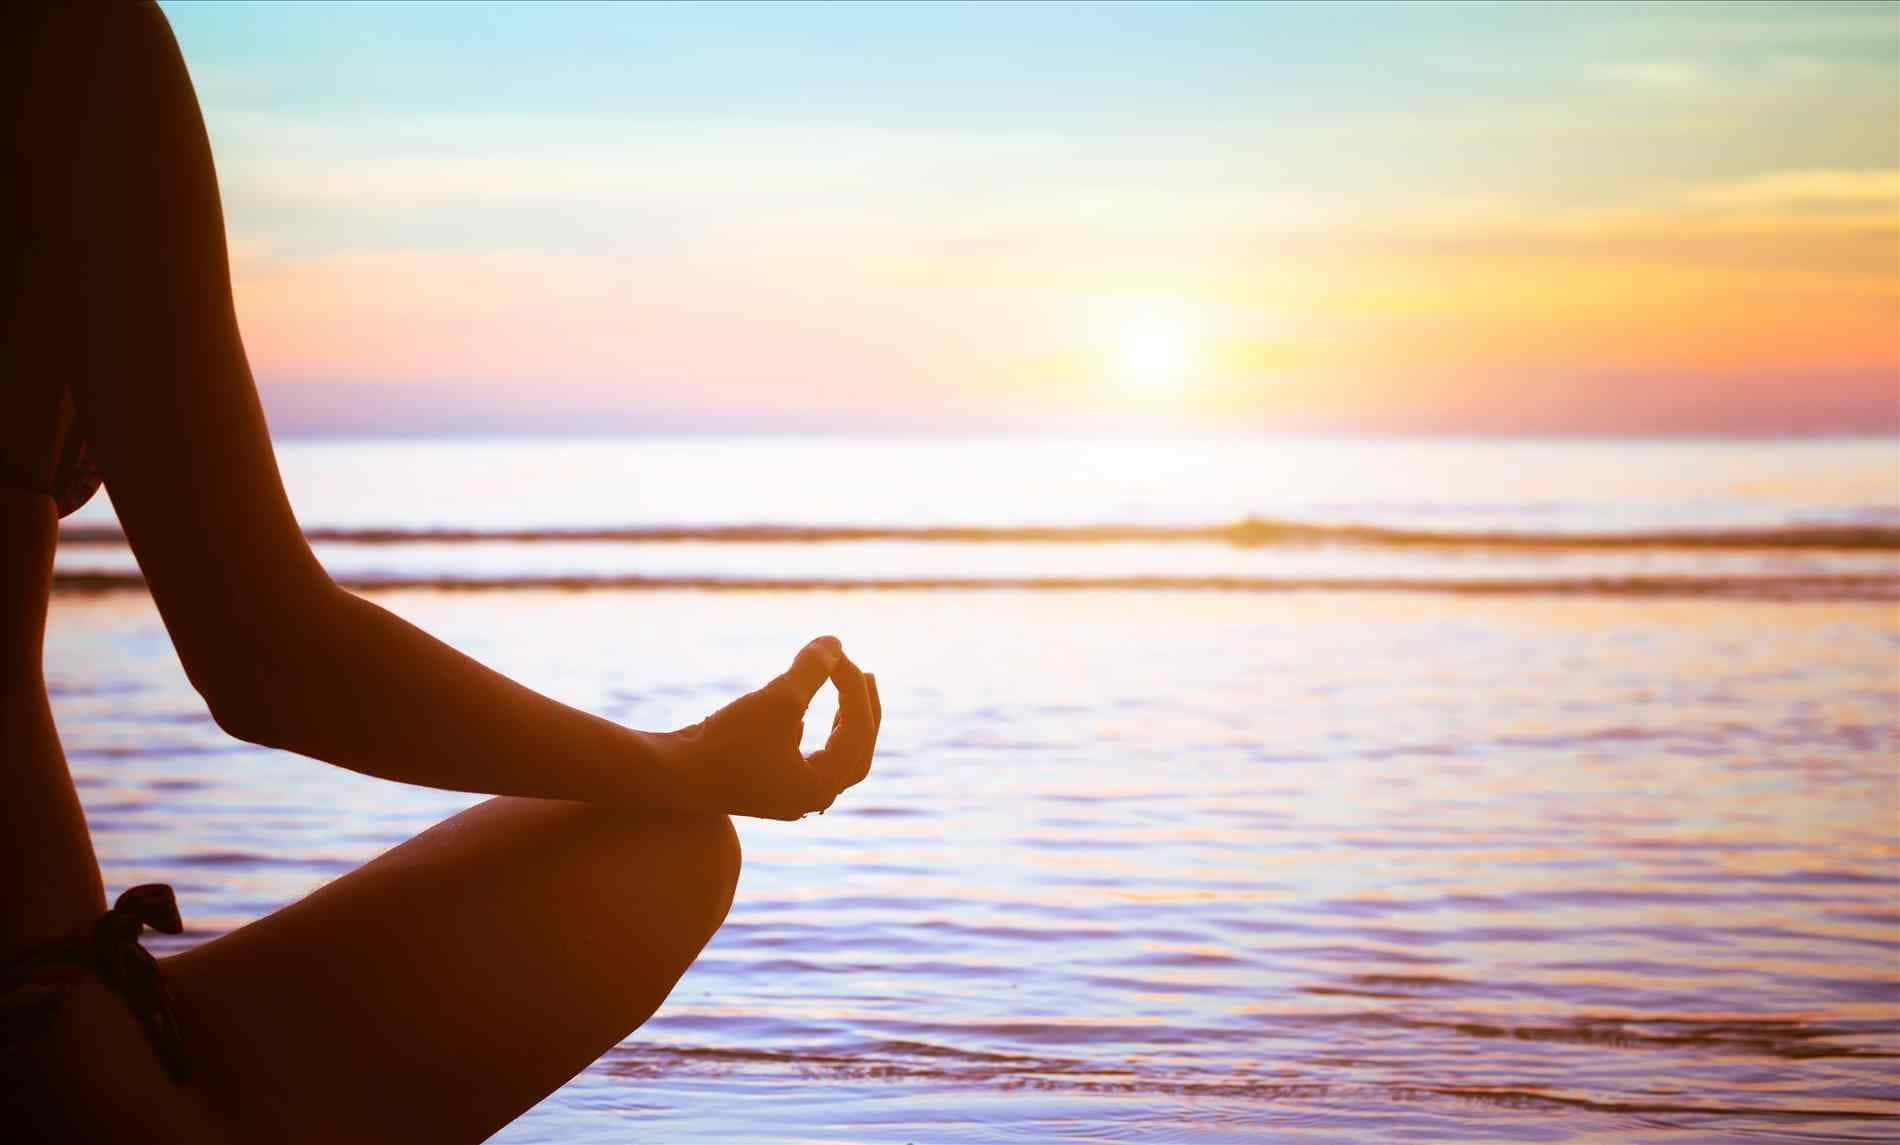 A Woman Is Meditating On The Beach At Sunset